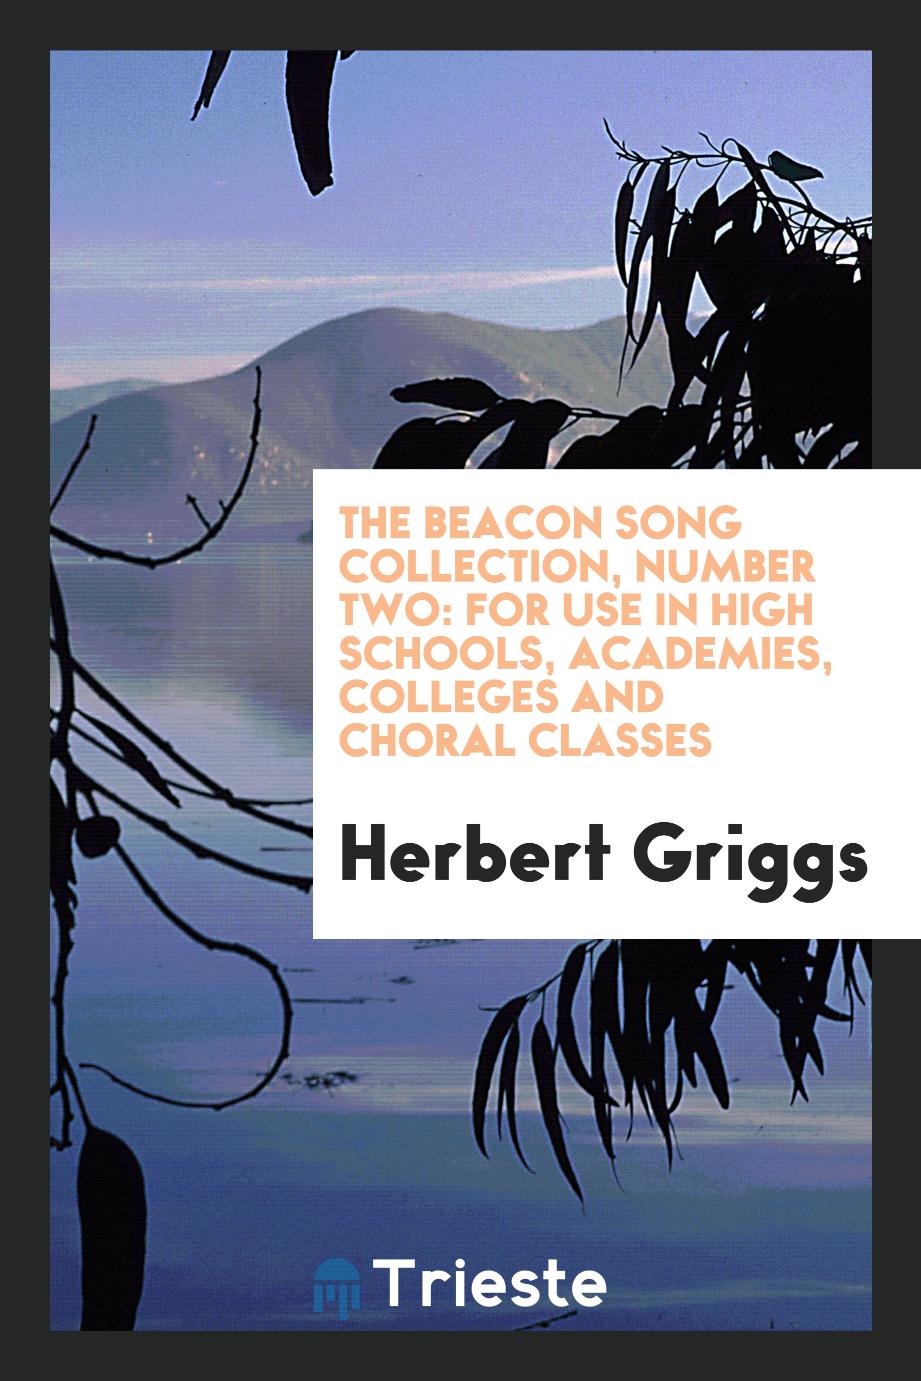 The Beacon Song Collection, Number Two: For Use in High Schools, Academies, Colleges and Choral Classes